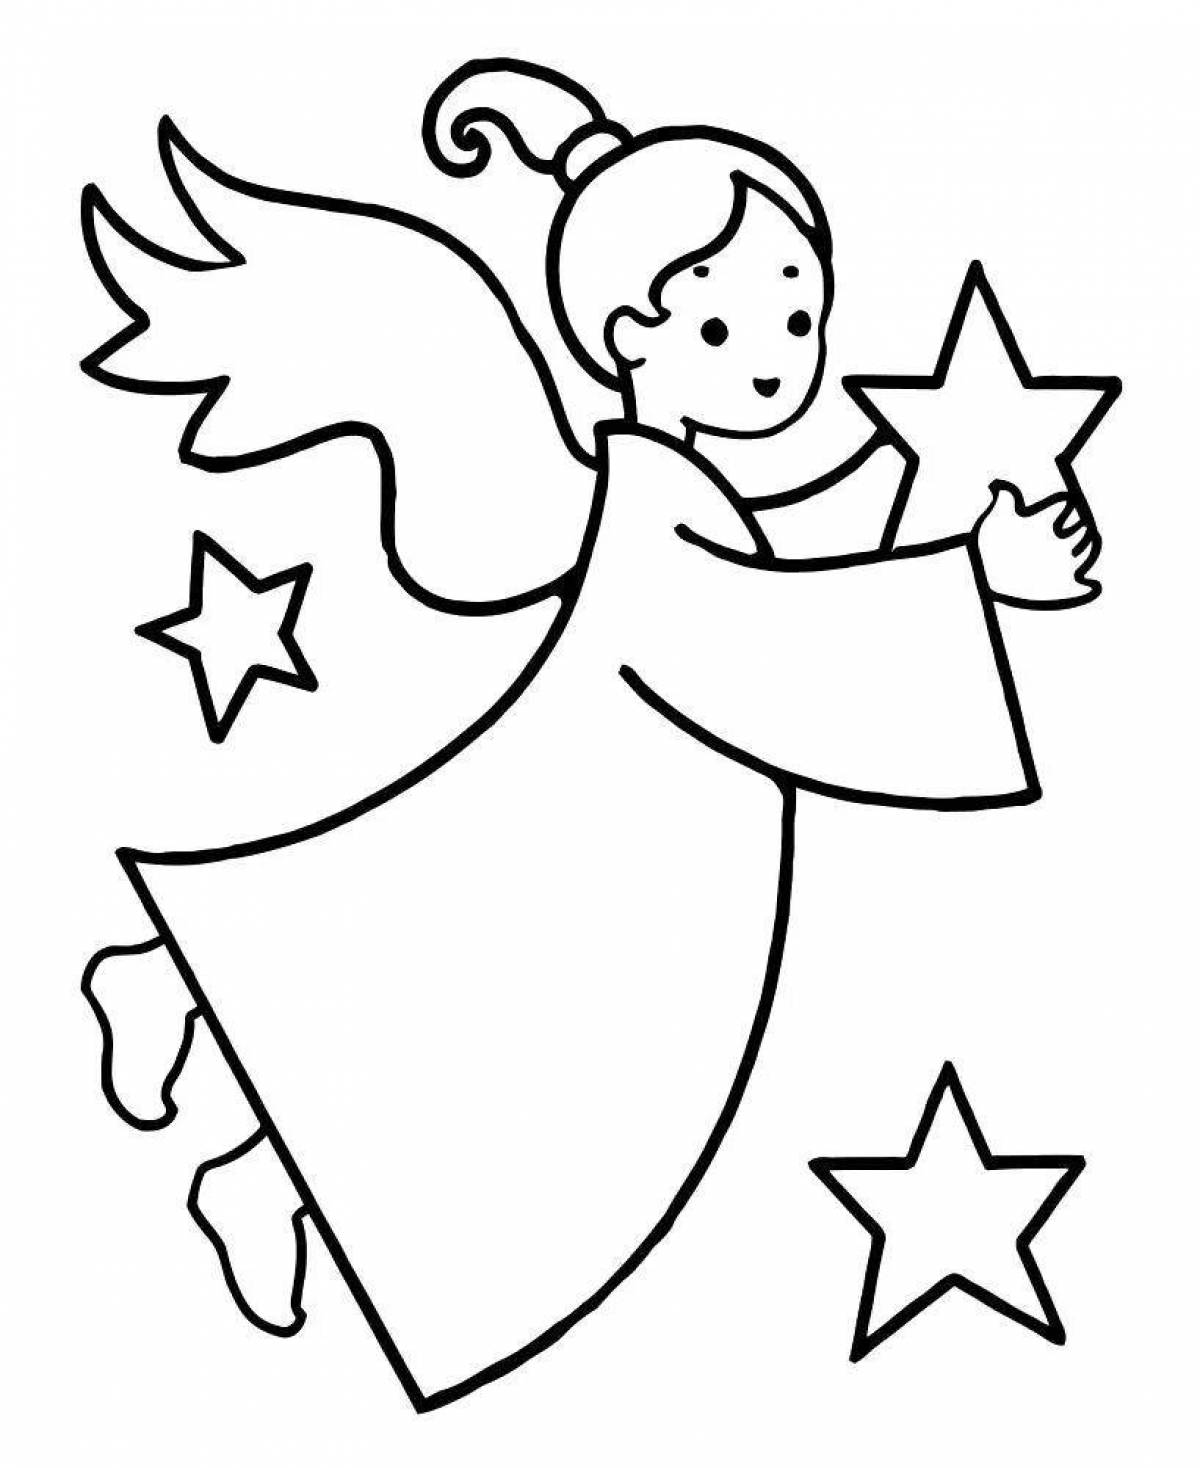 Sparkling Christmas star coloring book for kids